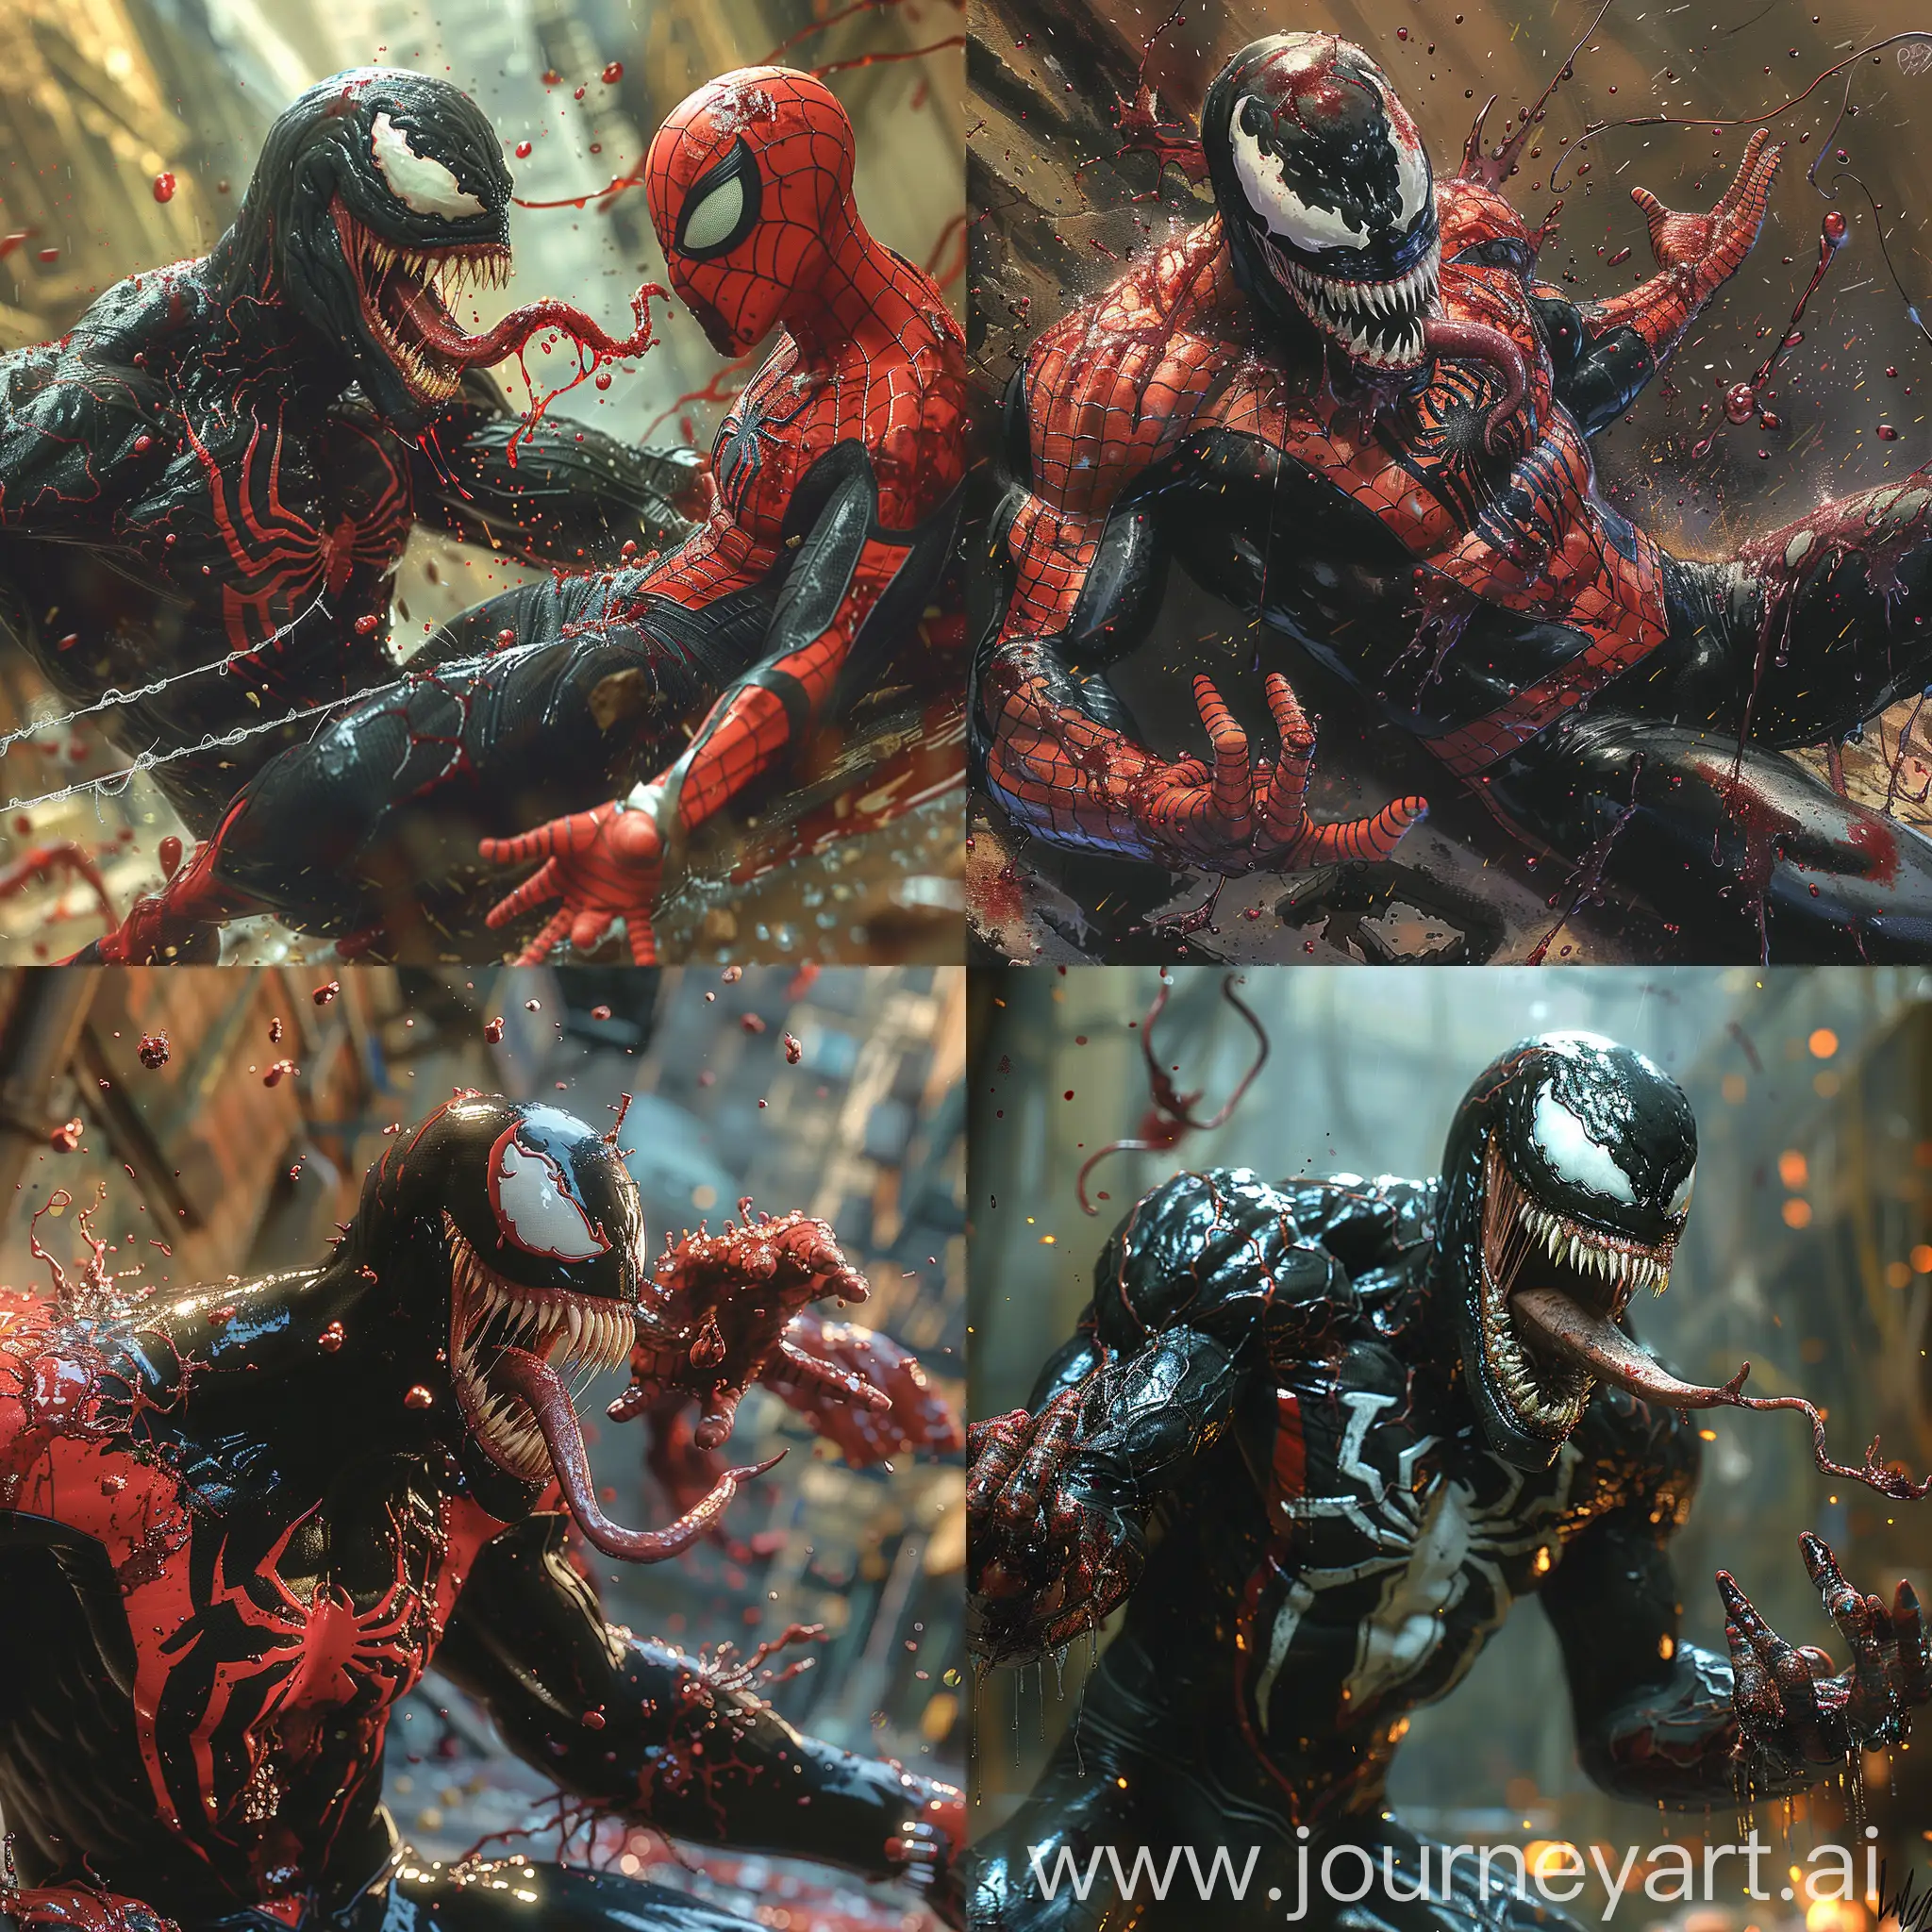 Vicious-Showdown-Venoms-Grip-on-SpiderMan-Amidst-BloodStained-Chaos